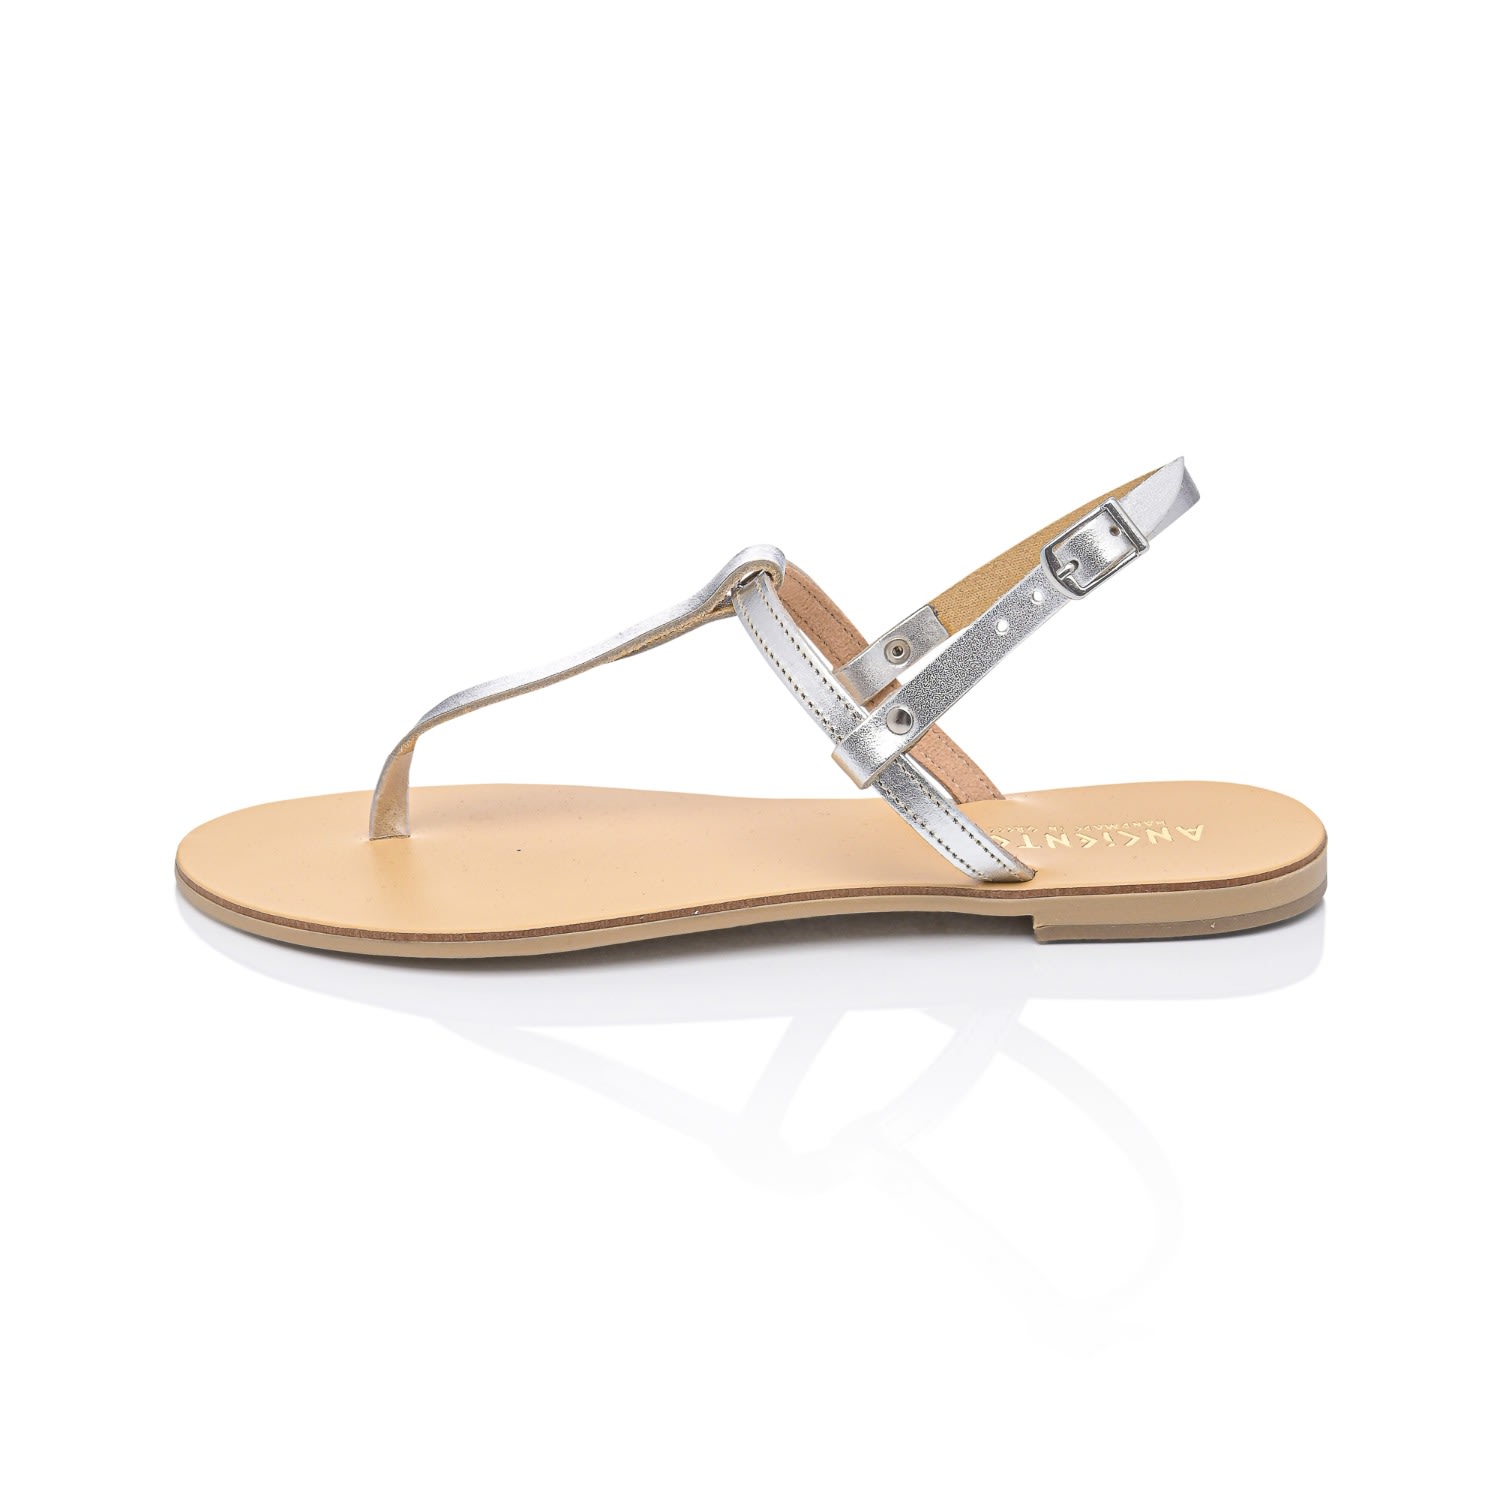 Neutrals / Silver Brizo Silver/Nude Handcrafted Women's Leather T-Strap Sandals - Designer Fashion Flat Sandals With Toe Separator 3 Uk Ancientoo